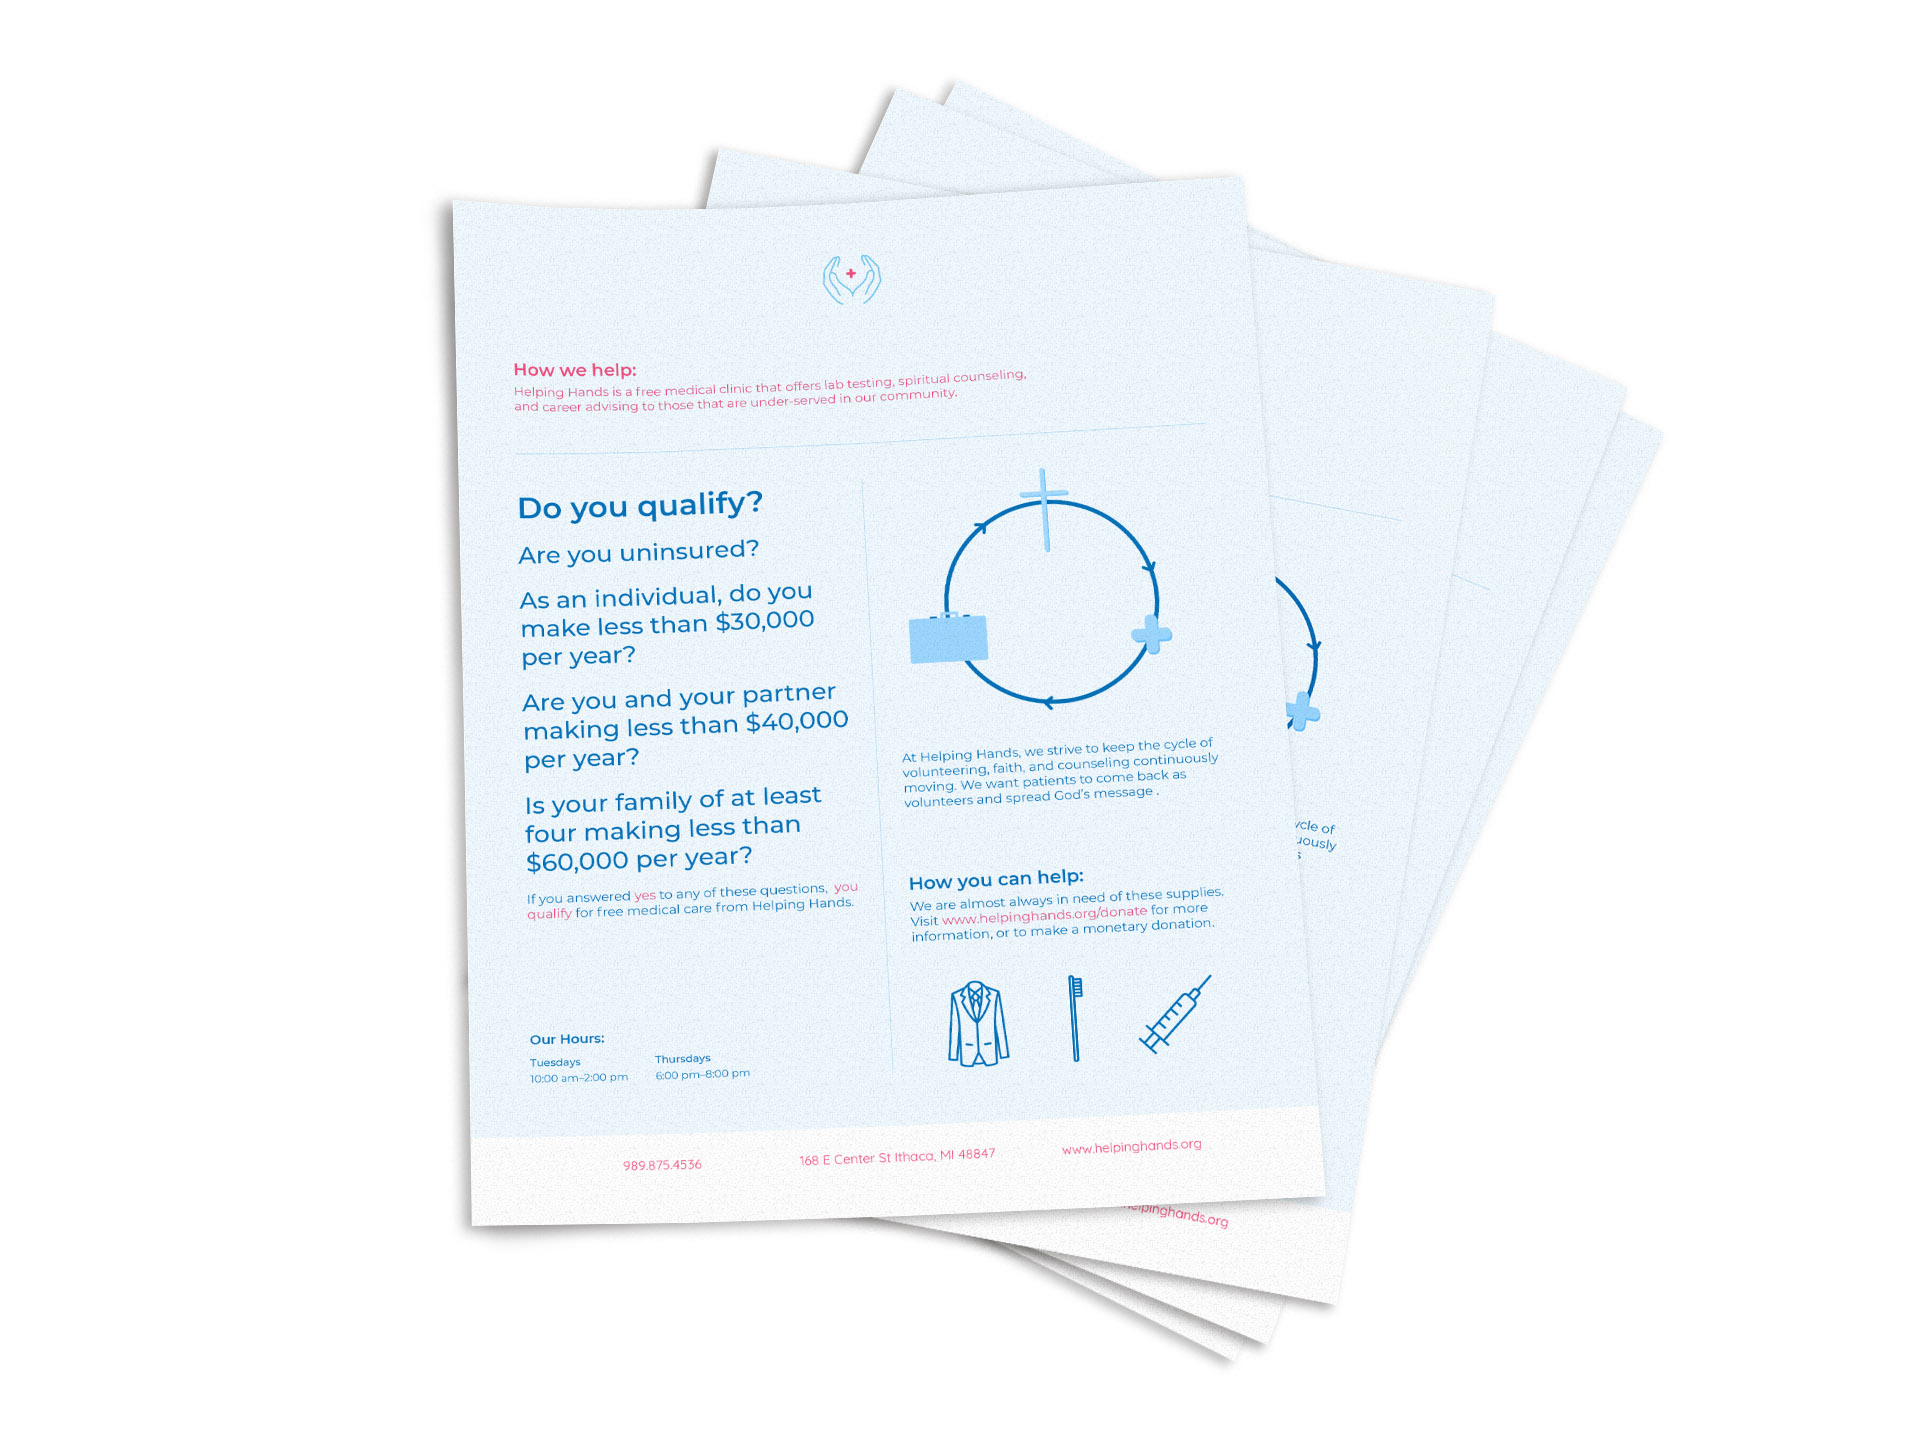 Print flyers showing services and necessary qualifications for Helping Hands.